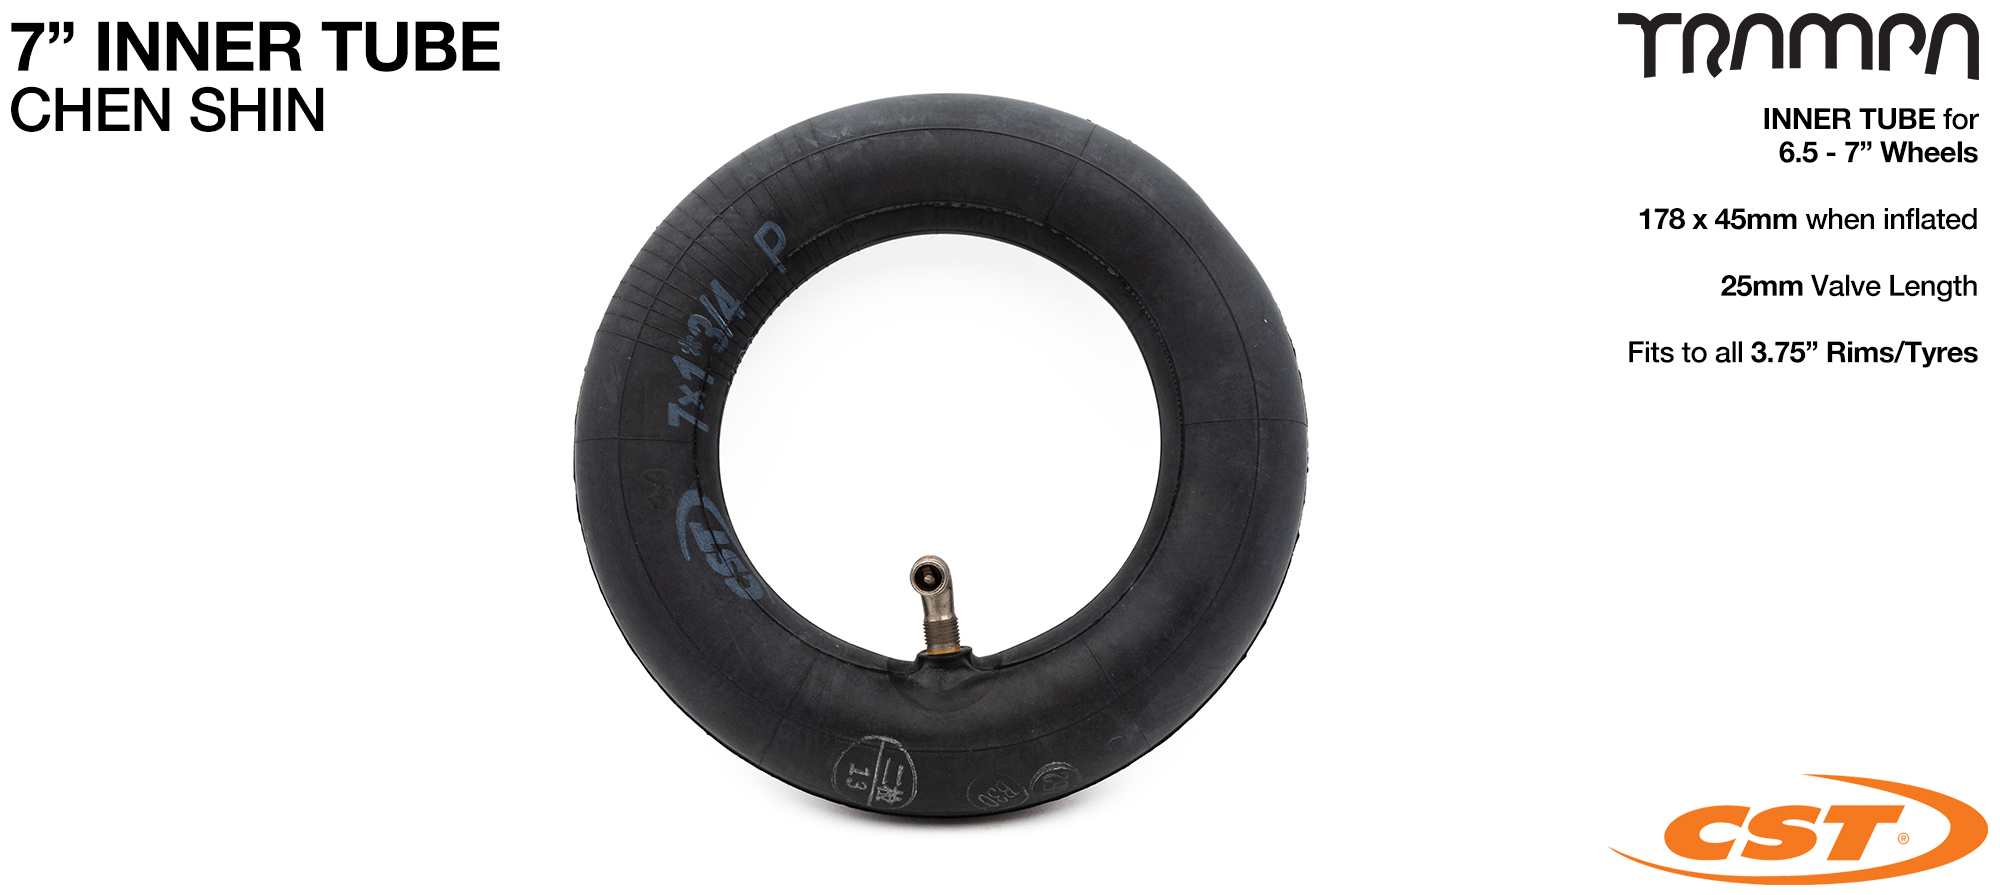 7 Inch Inner Tube CST 7x13/4 inch 175x45mm SILVER Valve - fits 3.75 inch Rims & 7 inch tyres